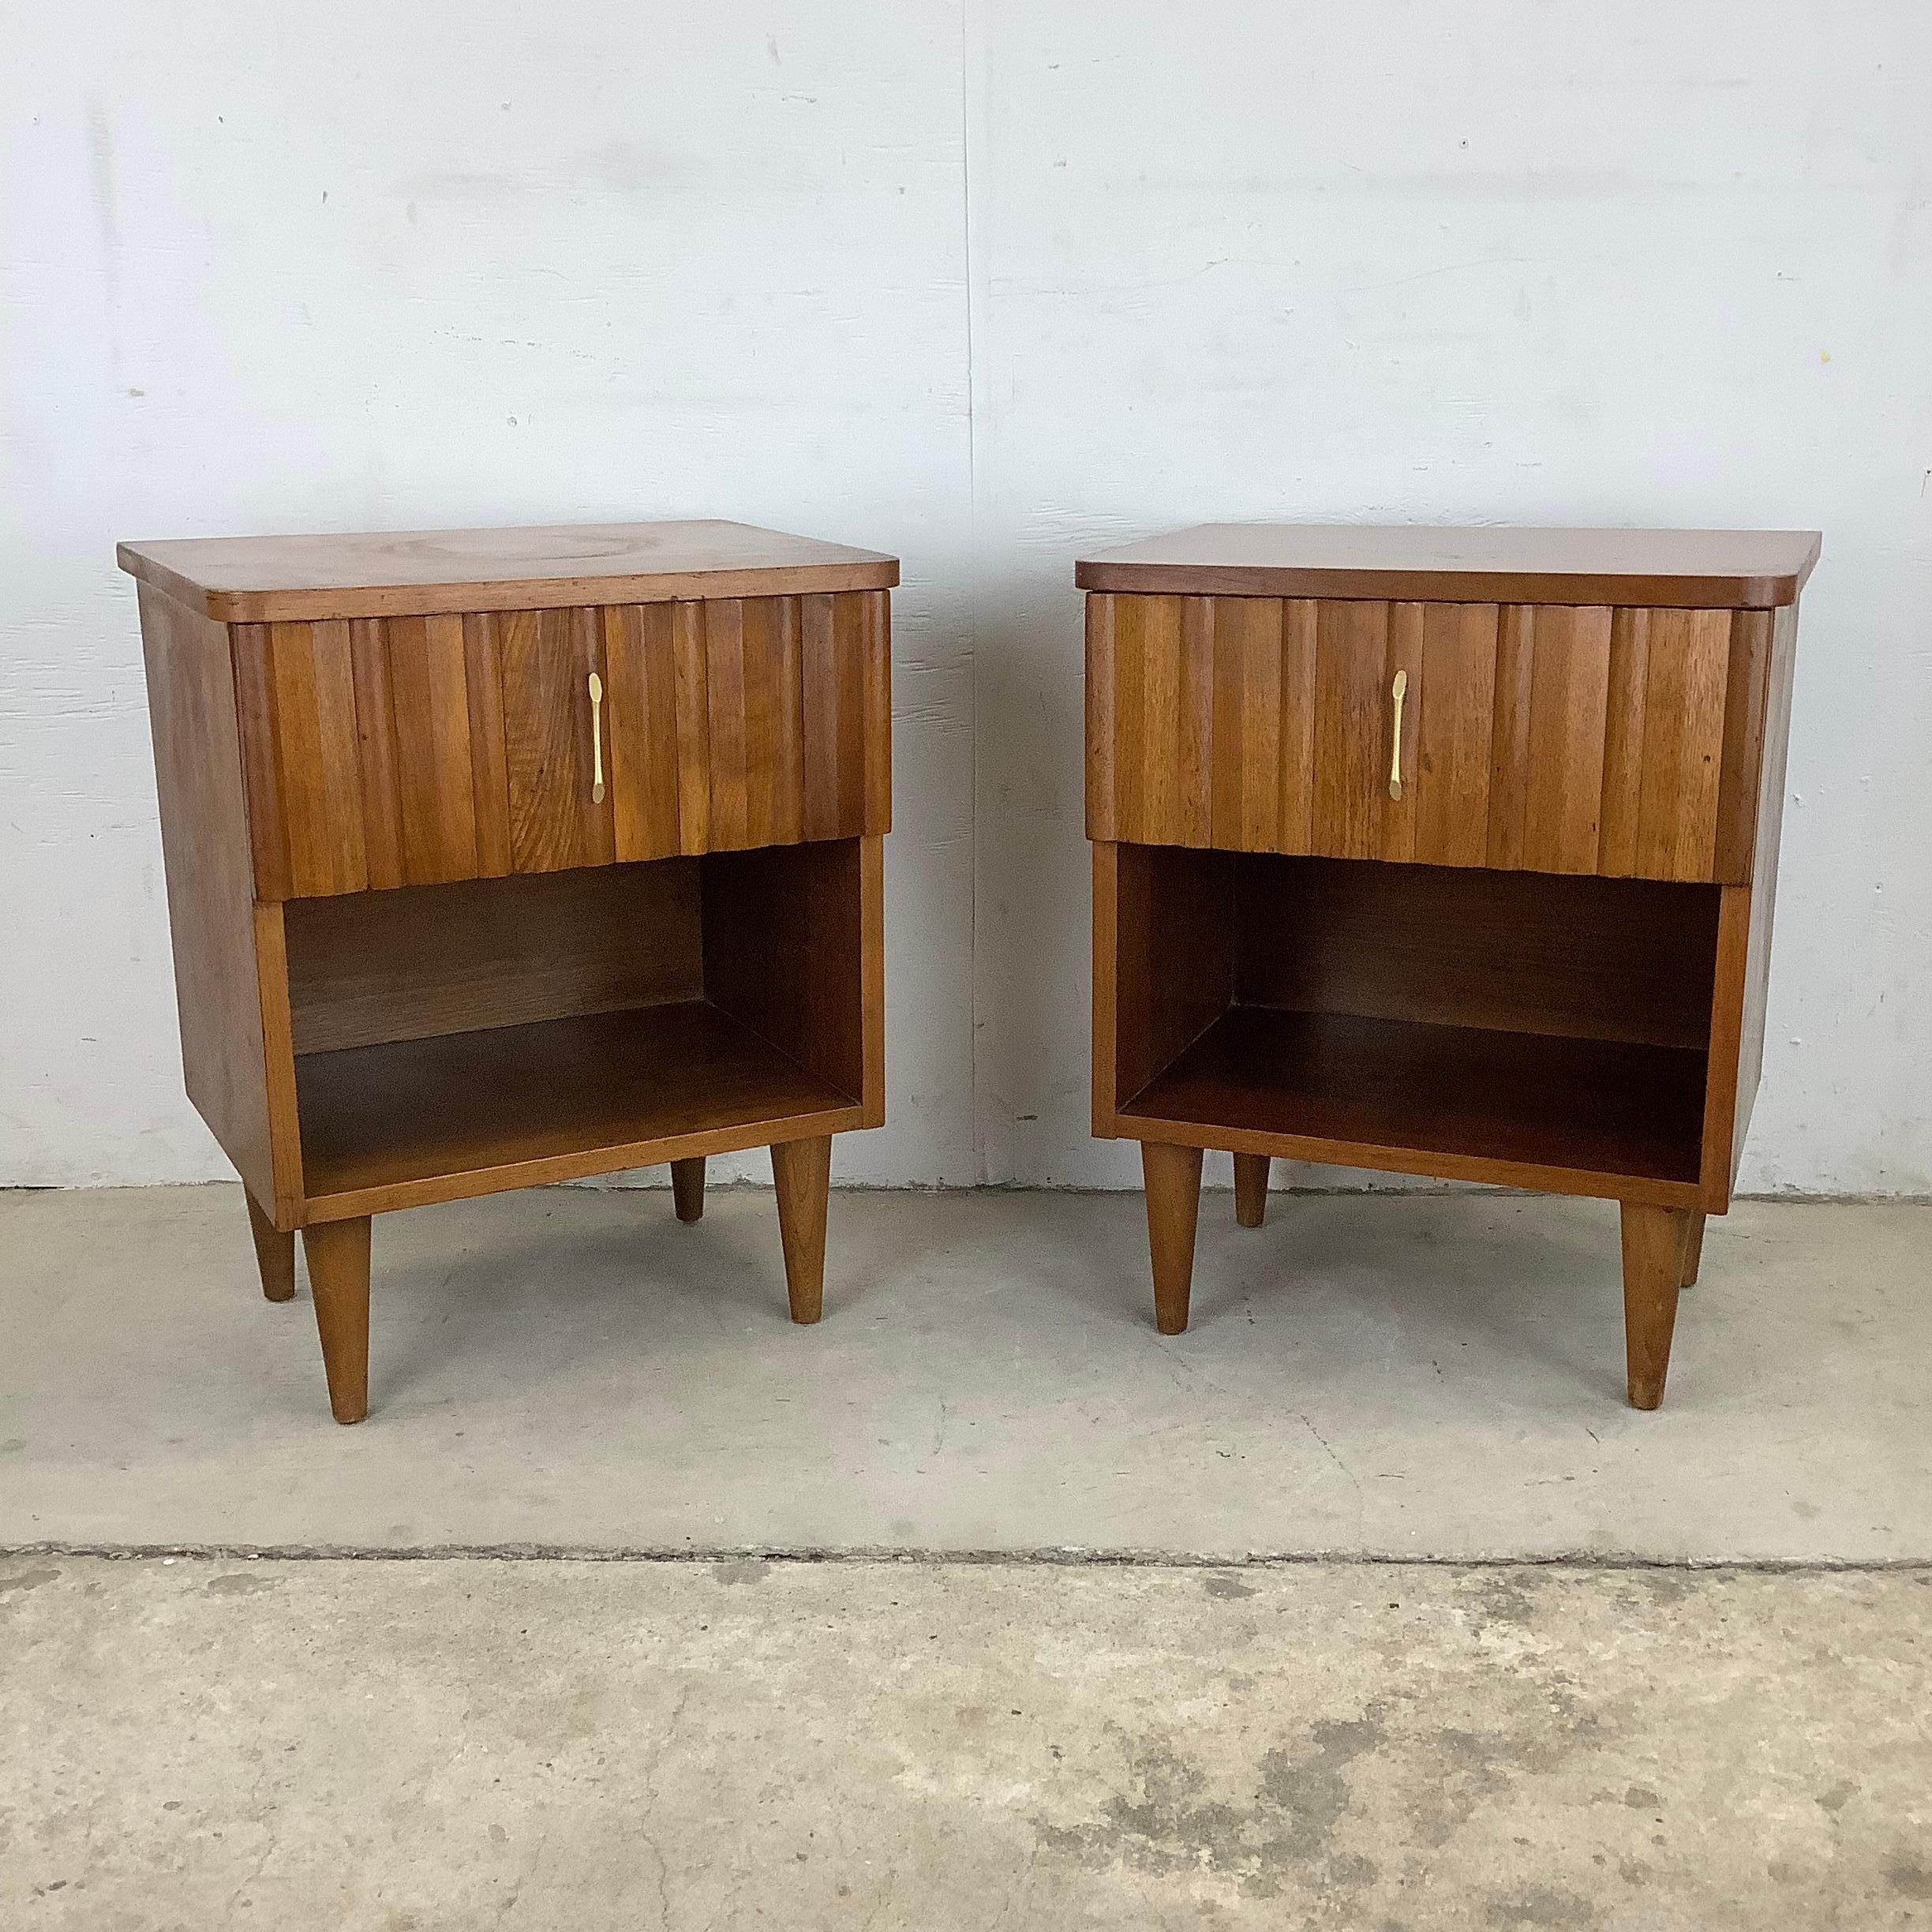 This vintage pair of midcentury nightstands feature a striking mix of upper drawer with lower shelf storage making for a versatile set of end tables for bedside storage or as living room end tables. The unique wood finish and clean modern lines add